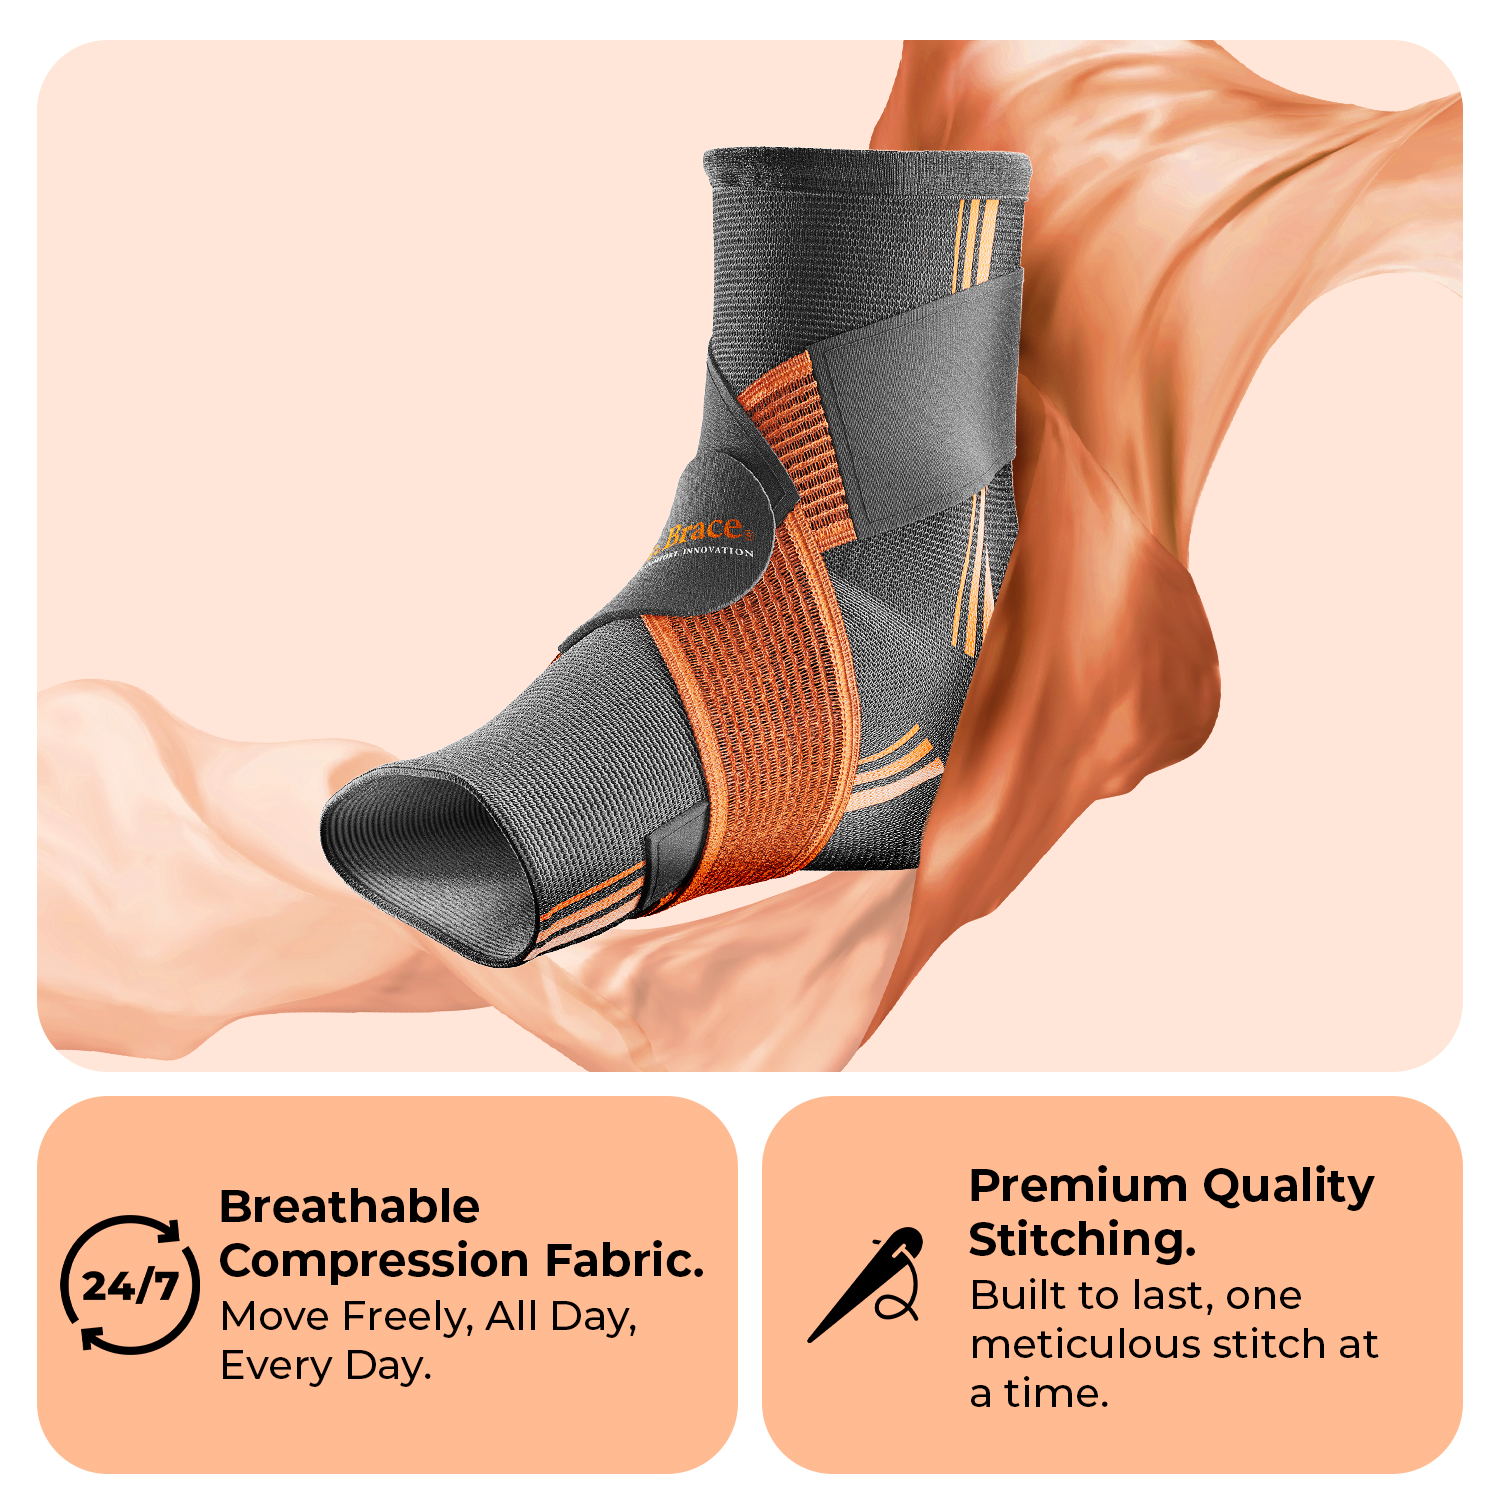 Ankle Sleeve for Support & Mobility